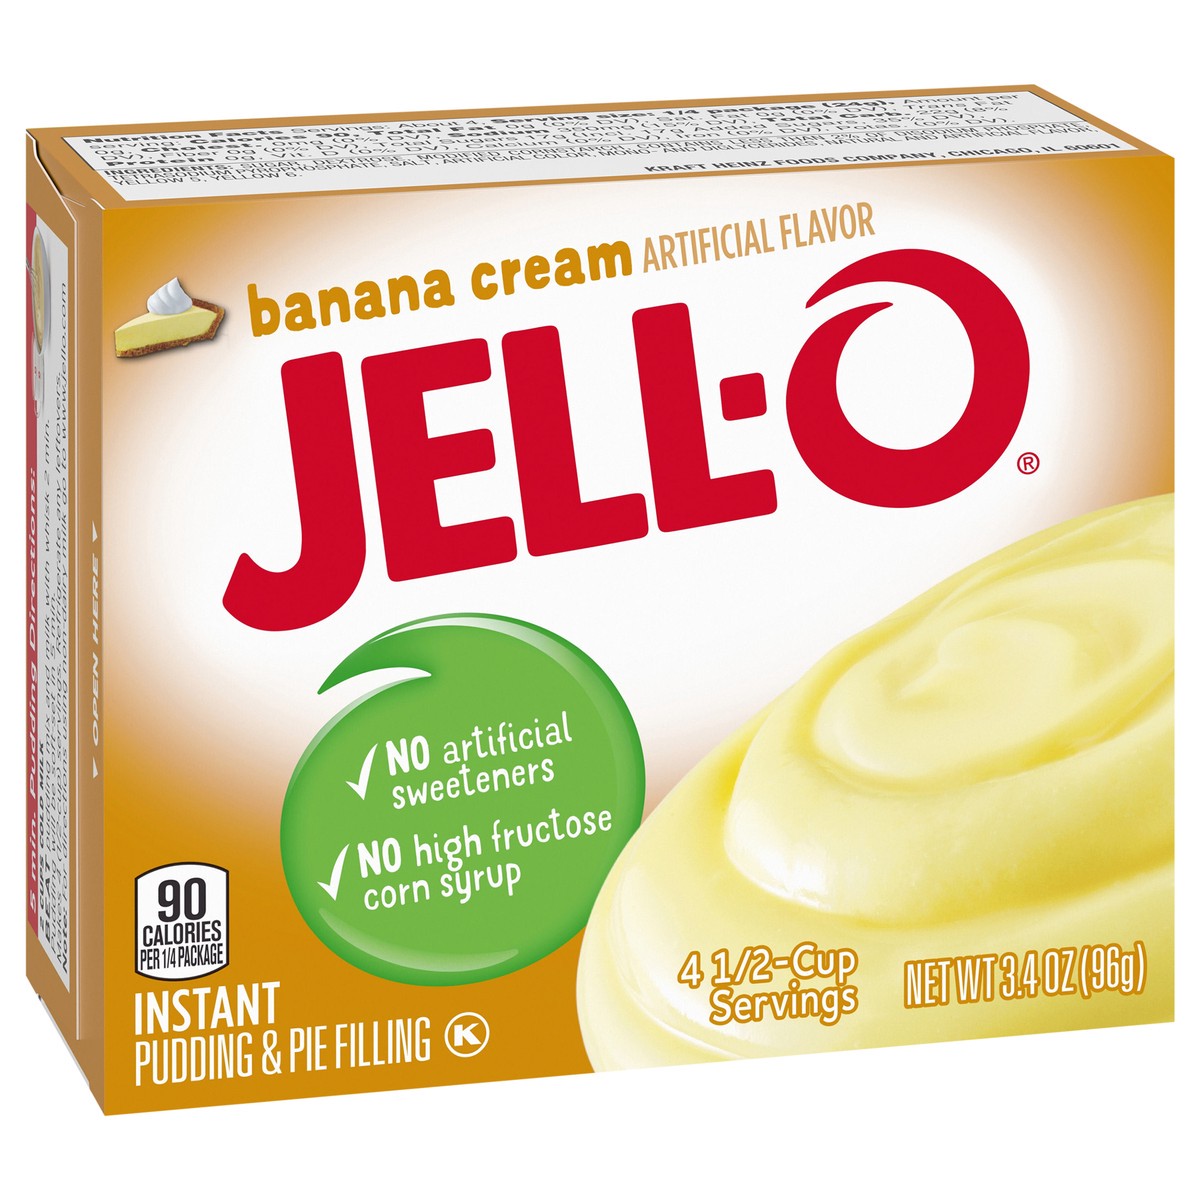 slide 5 of 9, Jell-O Banana Cream Artificially Flavored Instant Pudding & Pie Filling Mix, 3.4 oz. Box, 3.4 oz